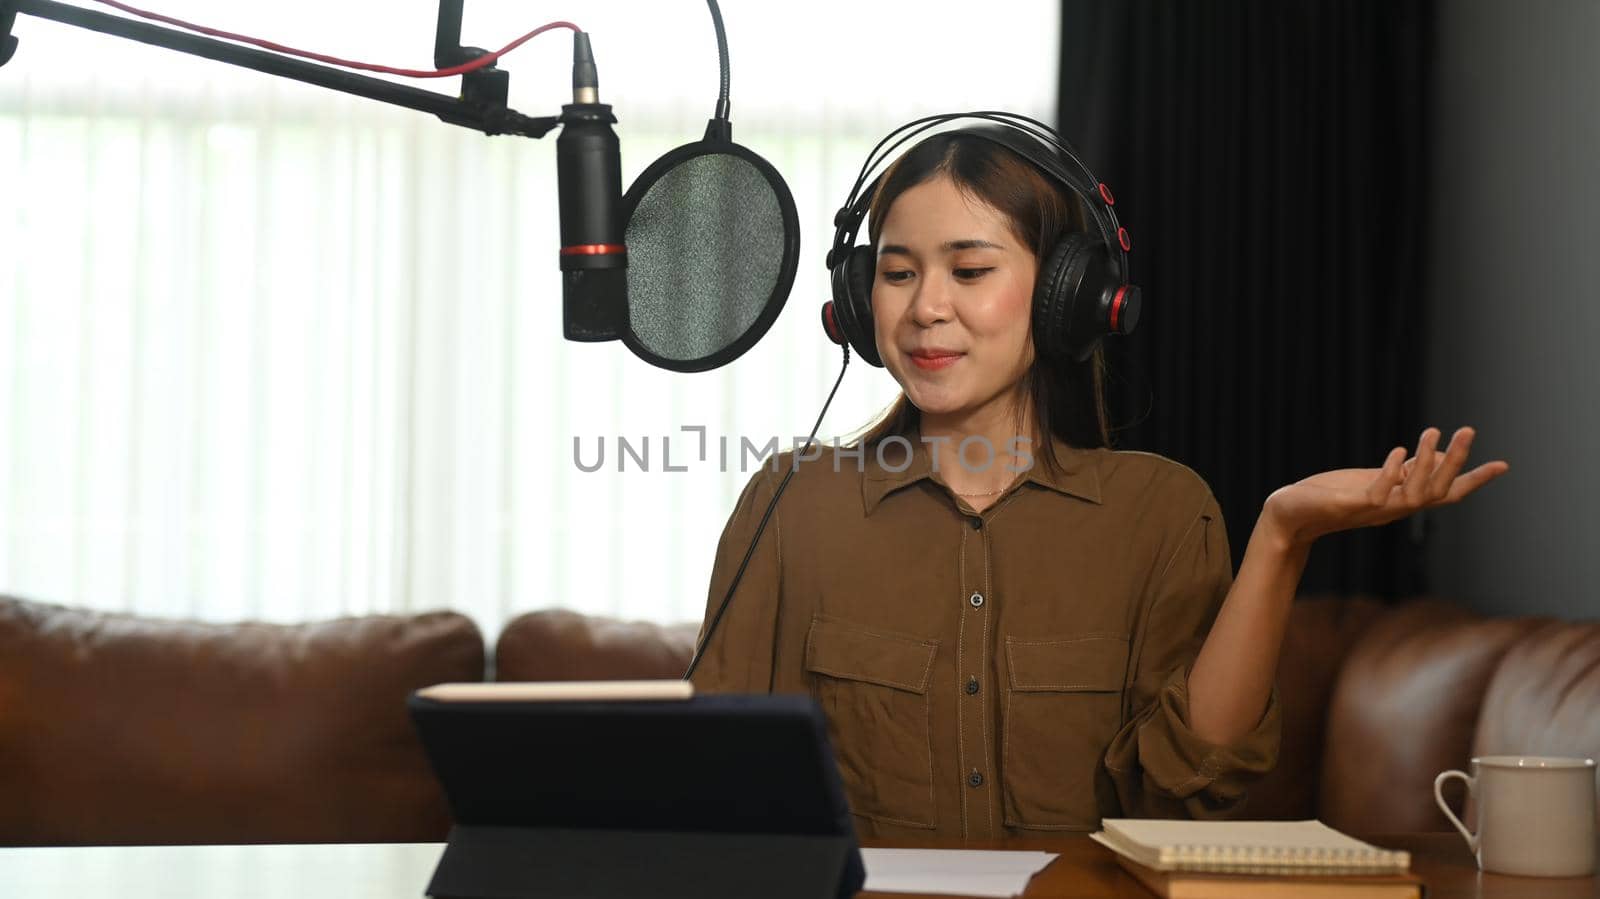 Smiling young woman using laptop and microphone streaming audio podcast at home studio by prathanchorruangsak